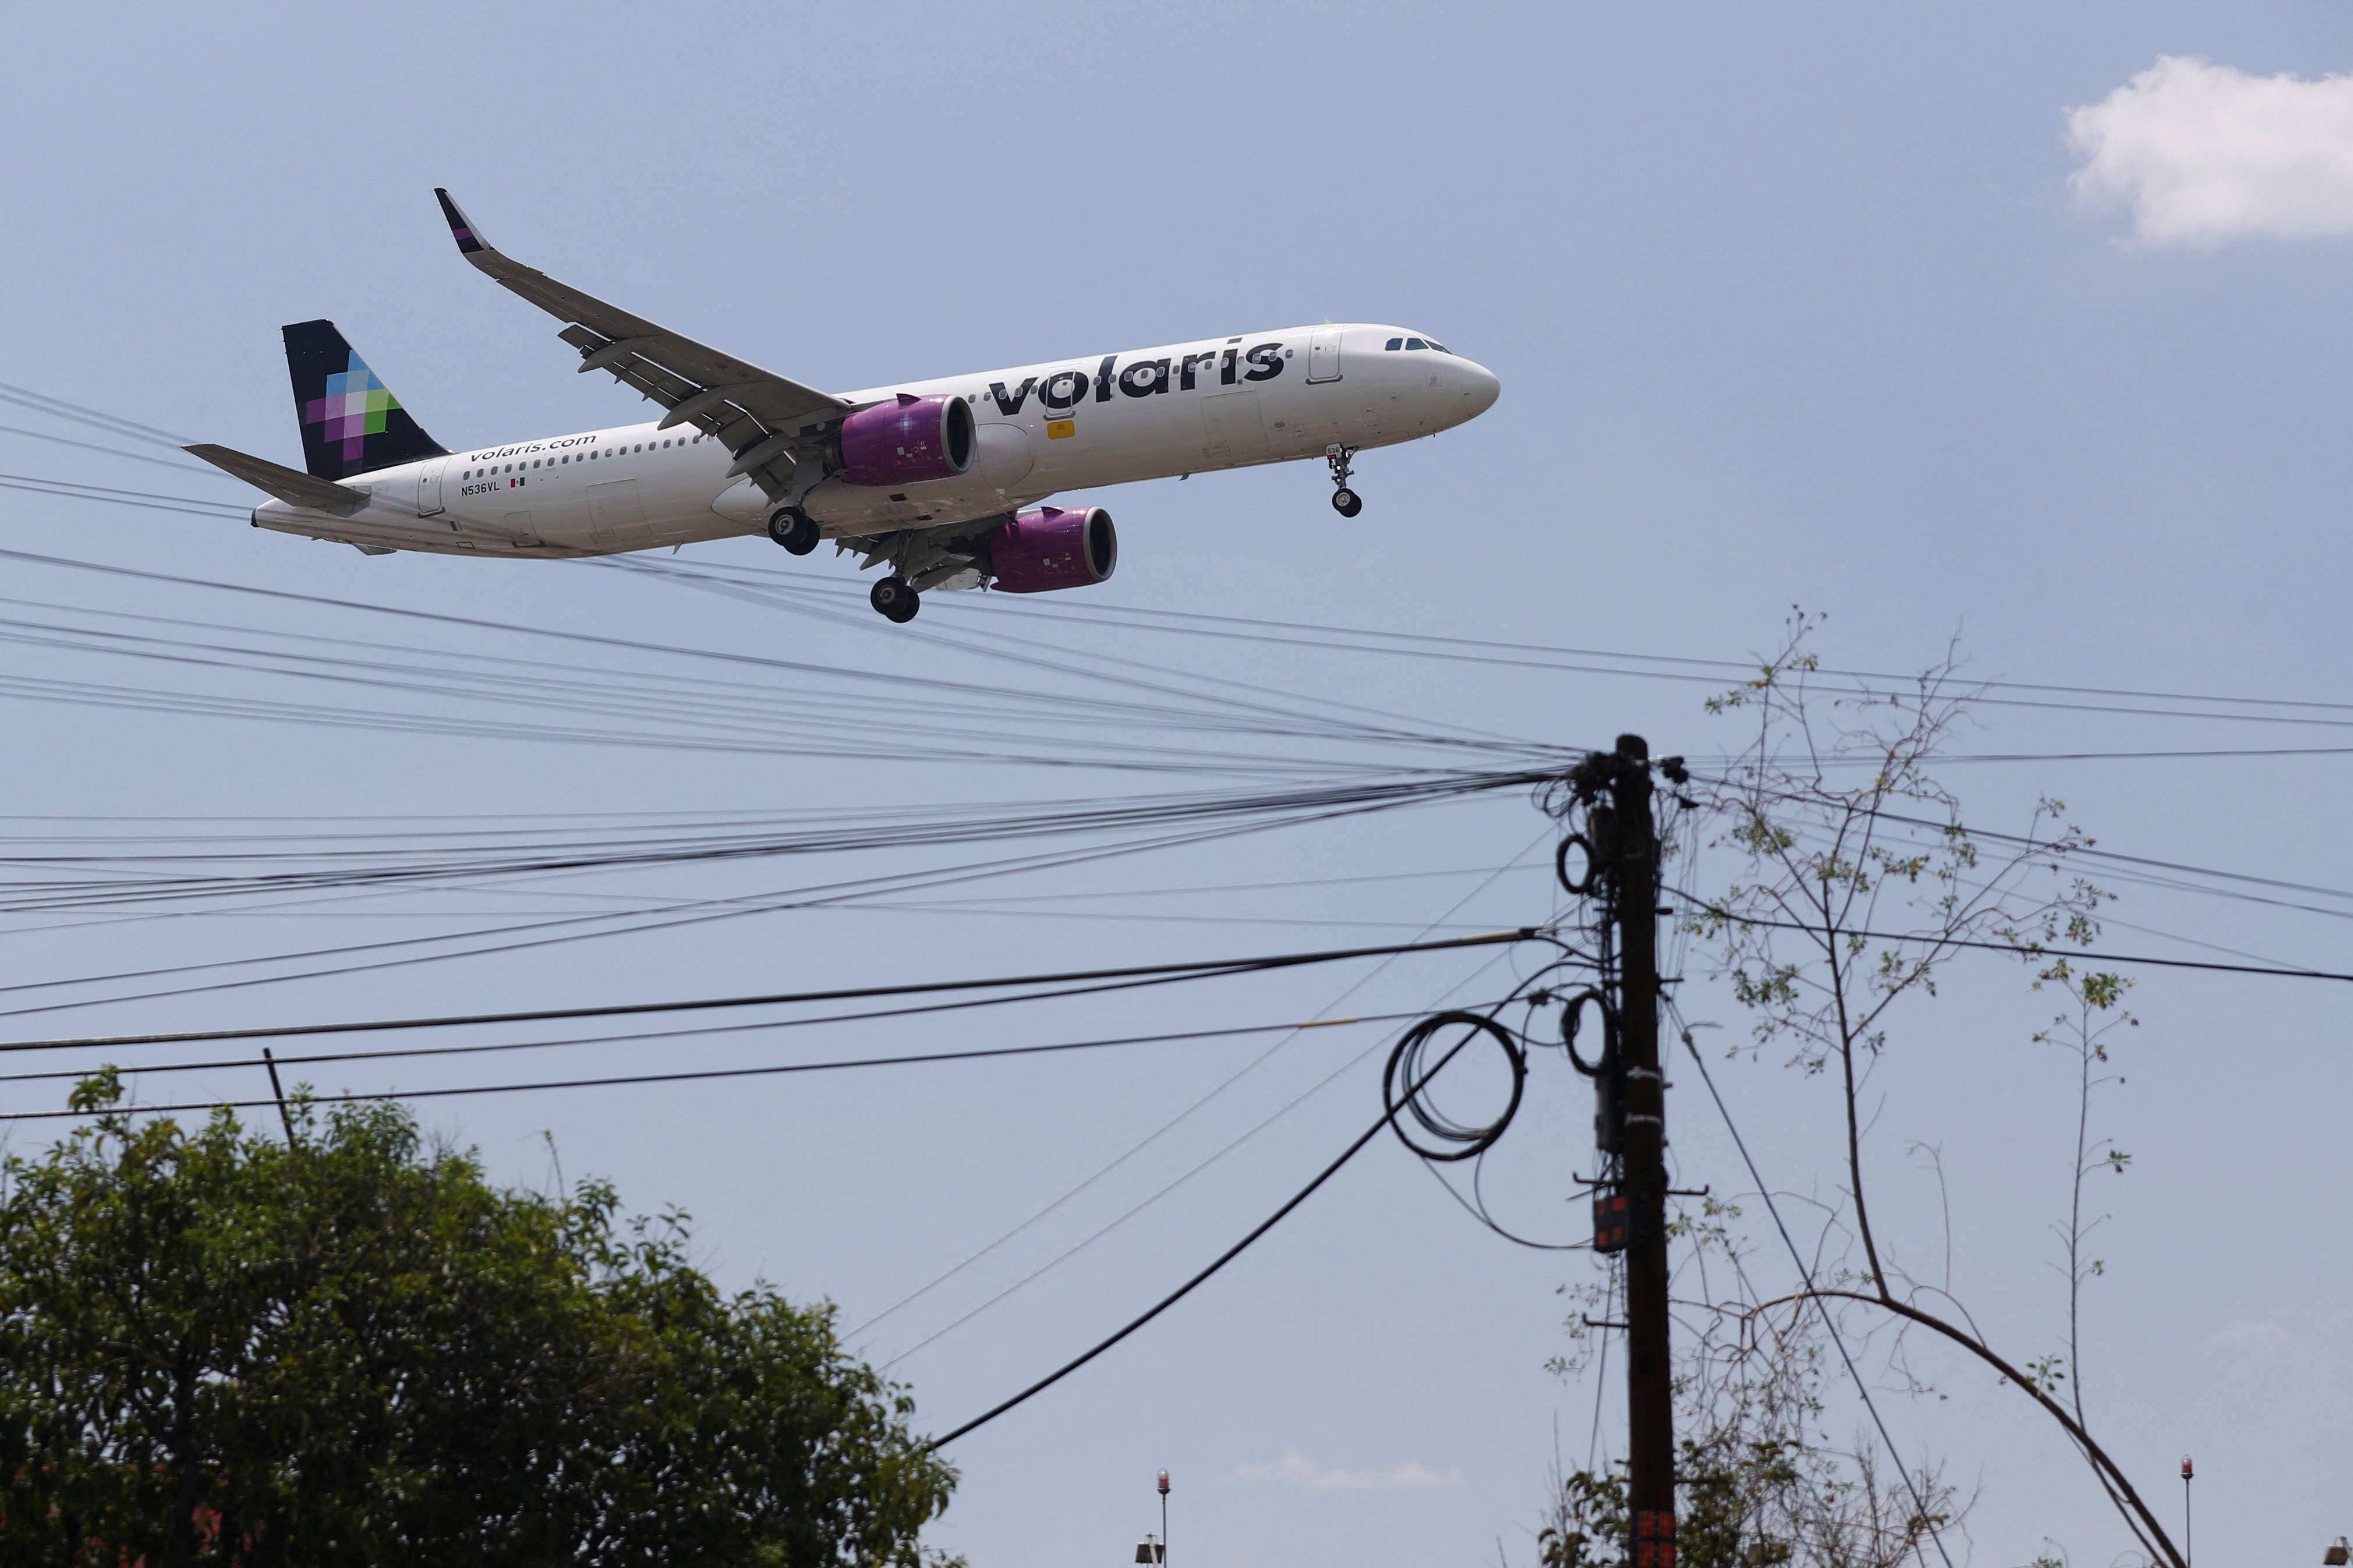 A Volaris airplane prepares to land on the airstrip at Benito Juarez international airport in Mexico City